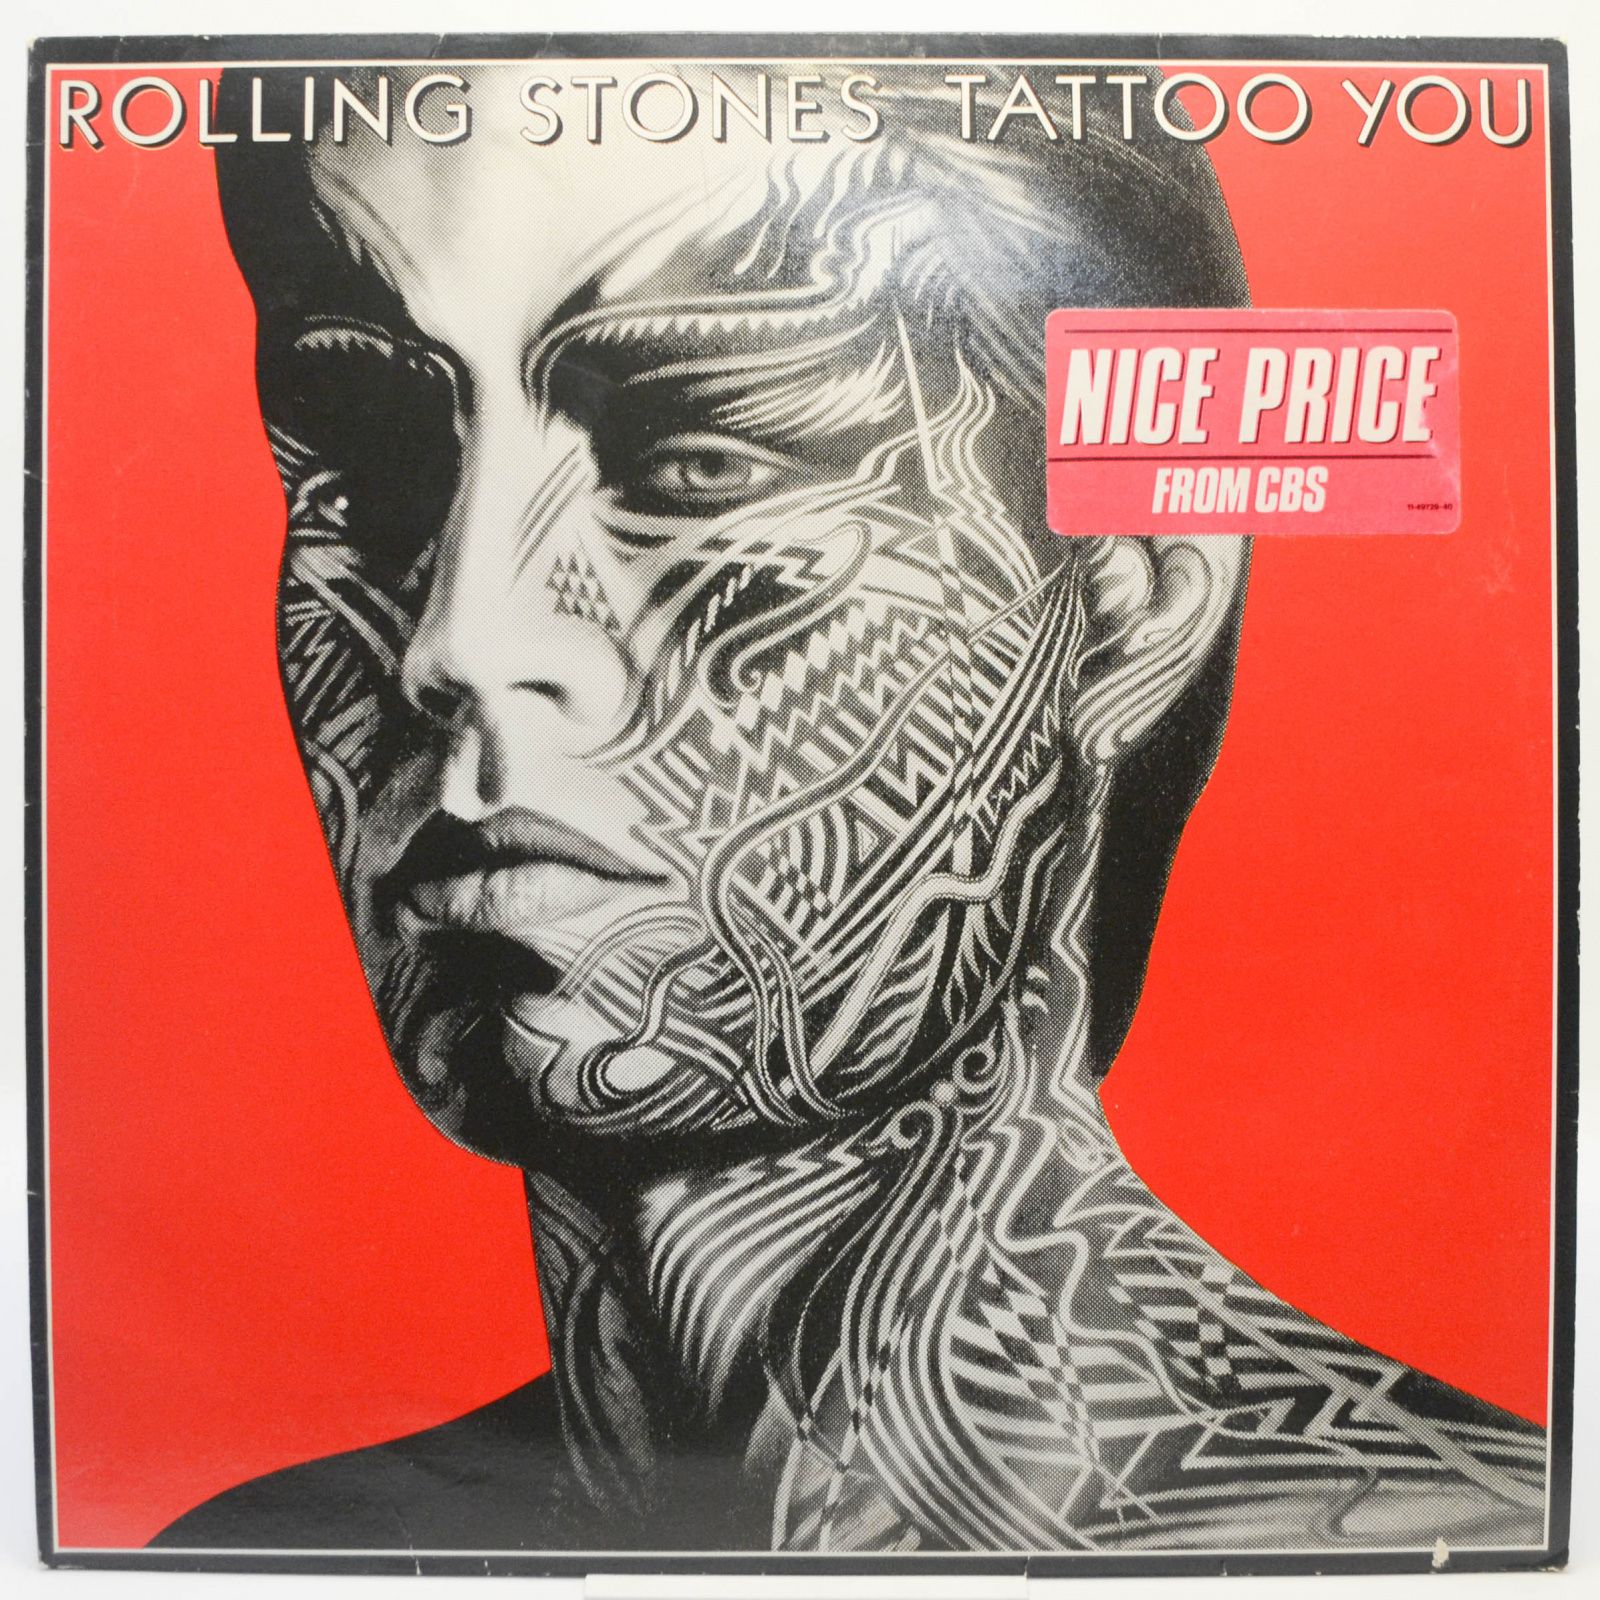 Rolling Stones — Tattoo You, 1988